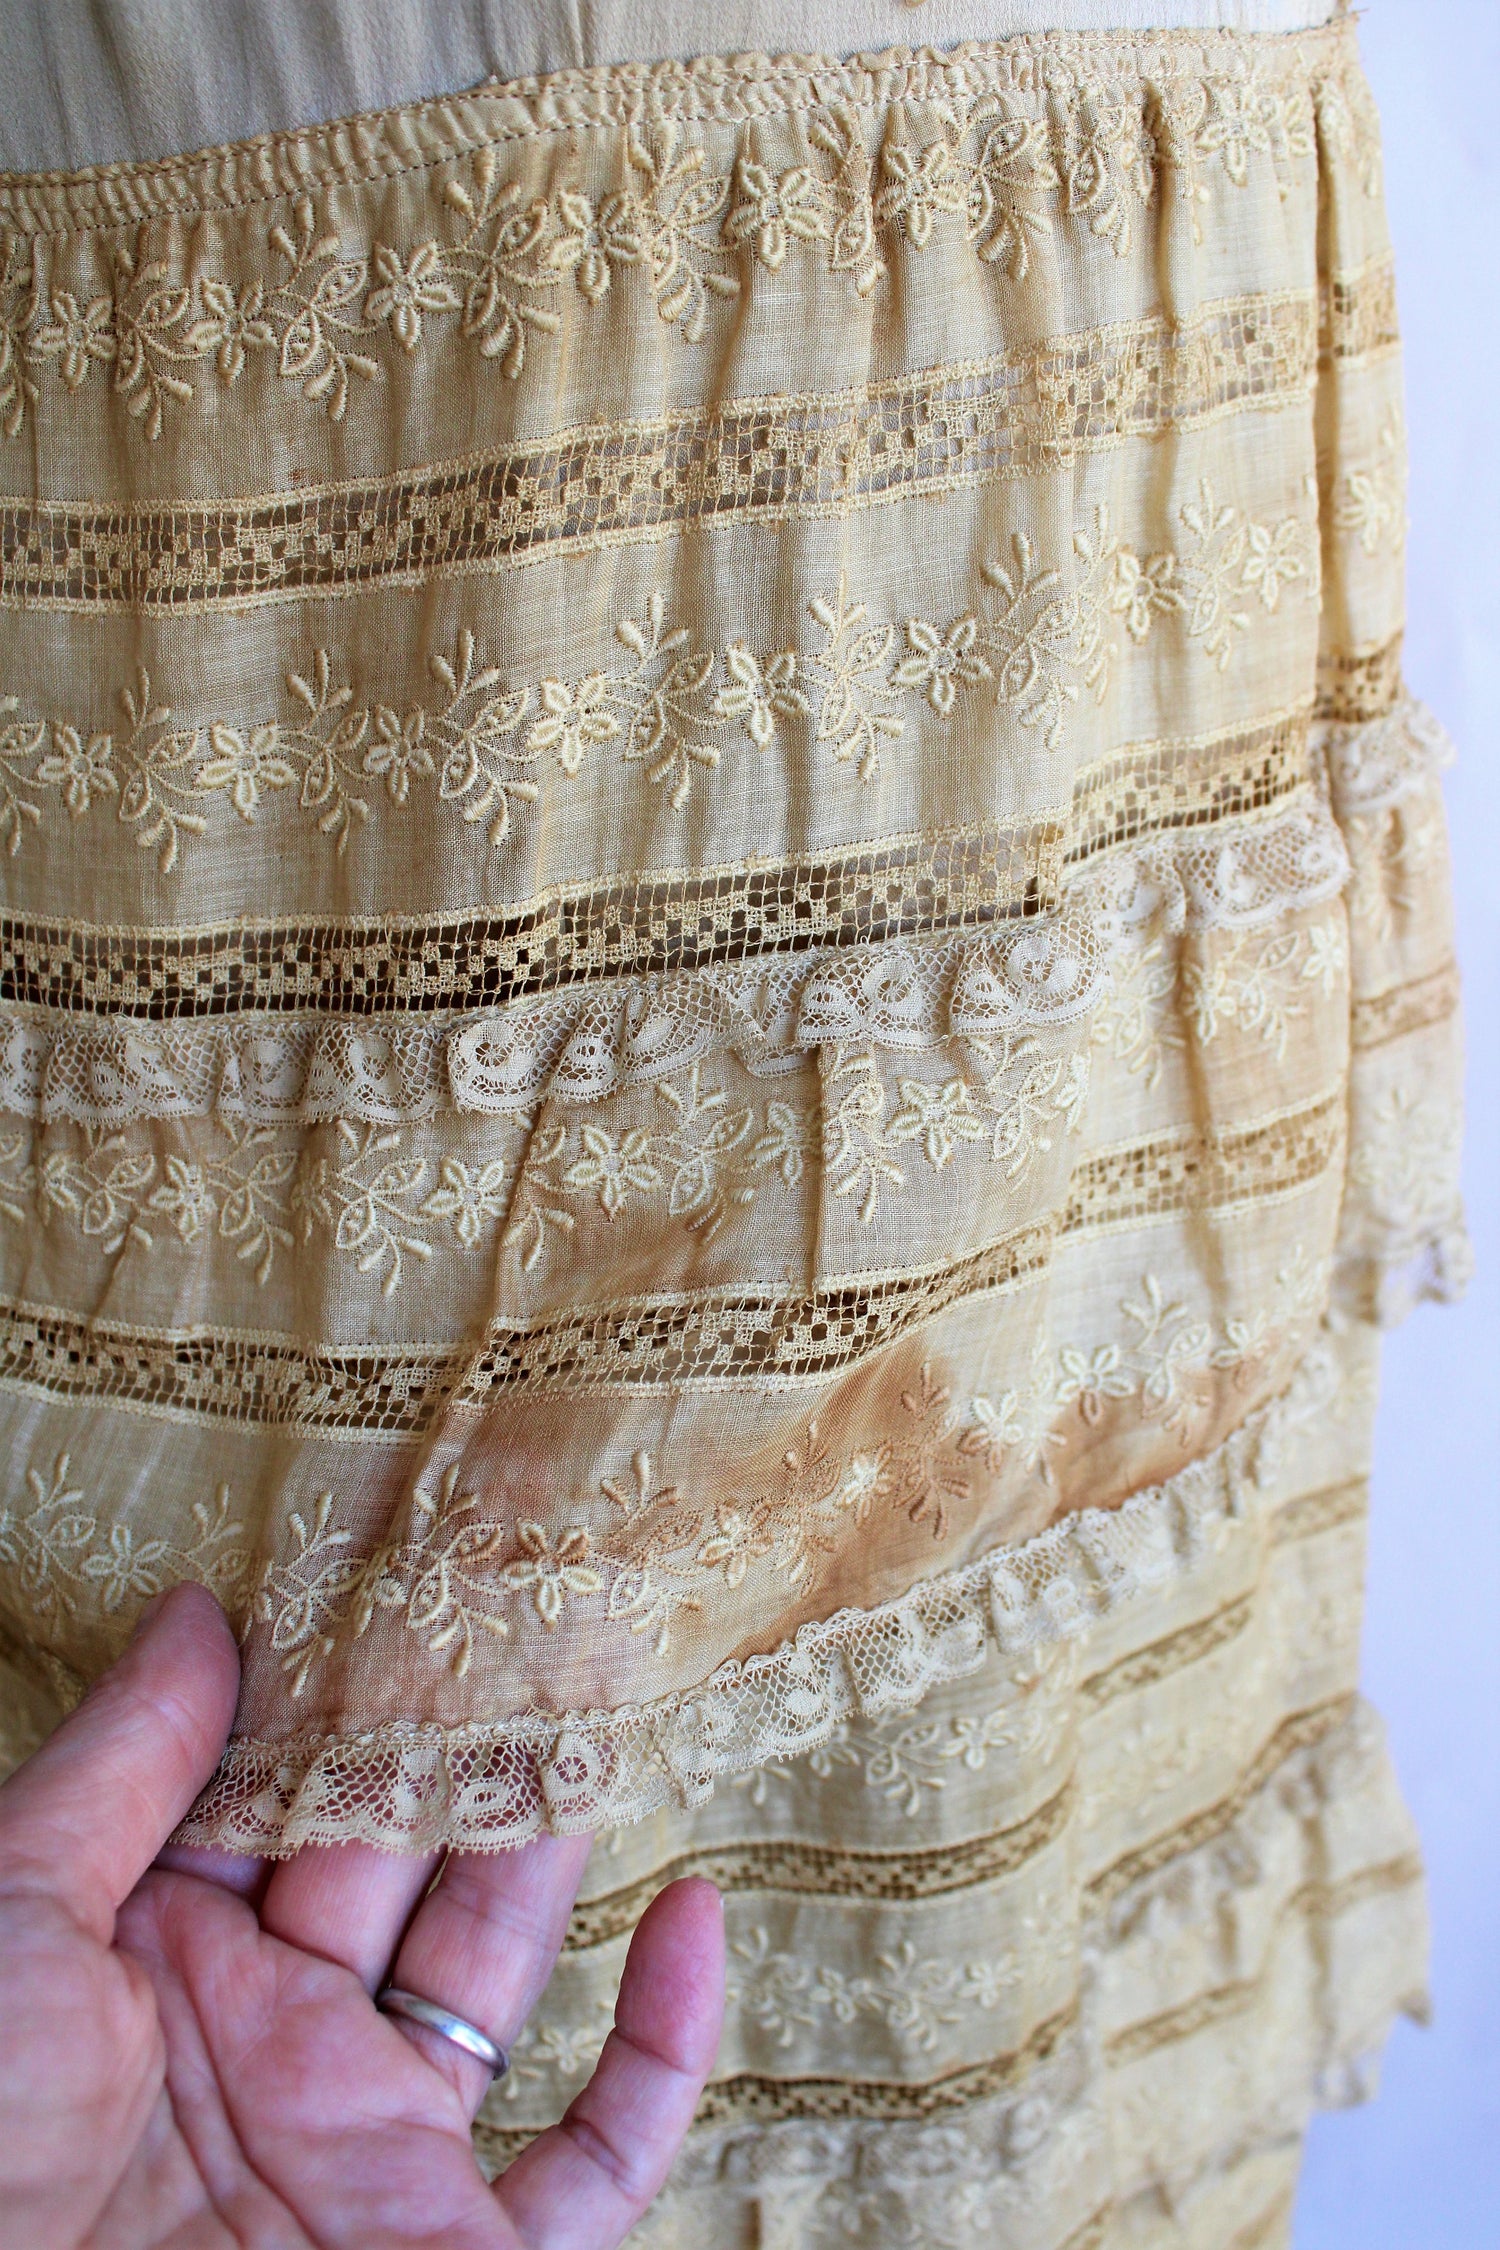 Vintage 1920s Gold Silk And Lace Flapper Dress With Drop Waist In Large Size